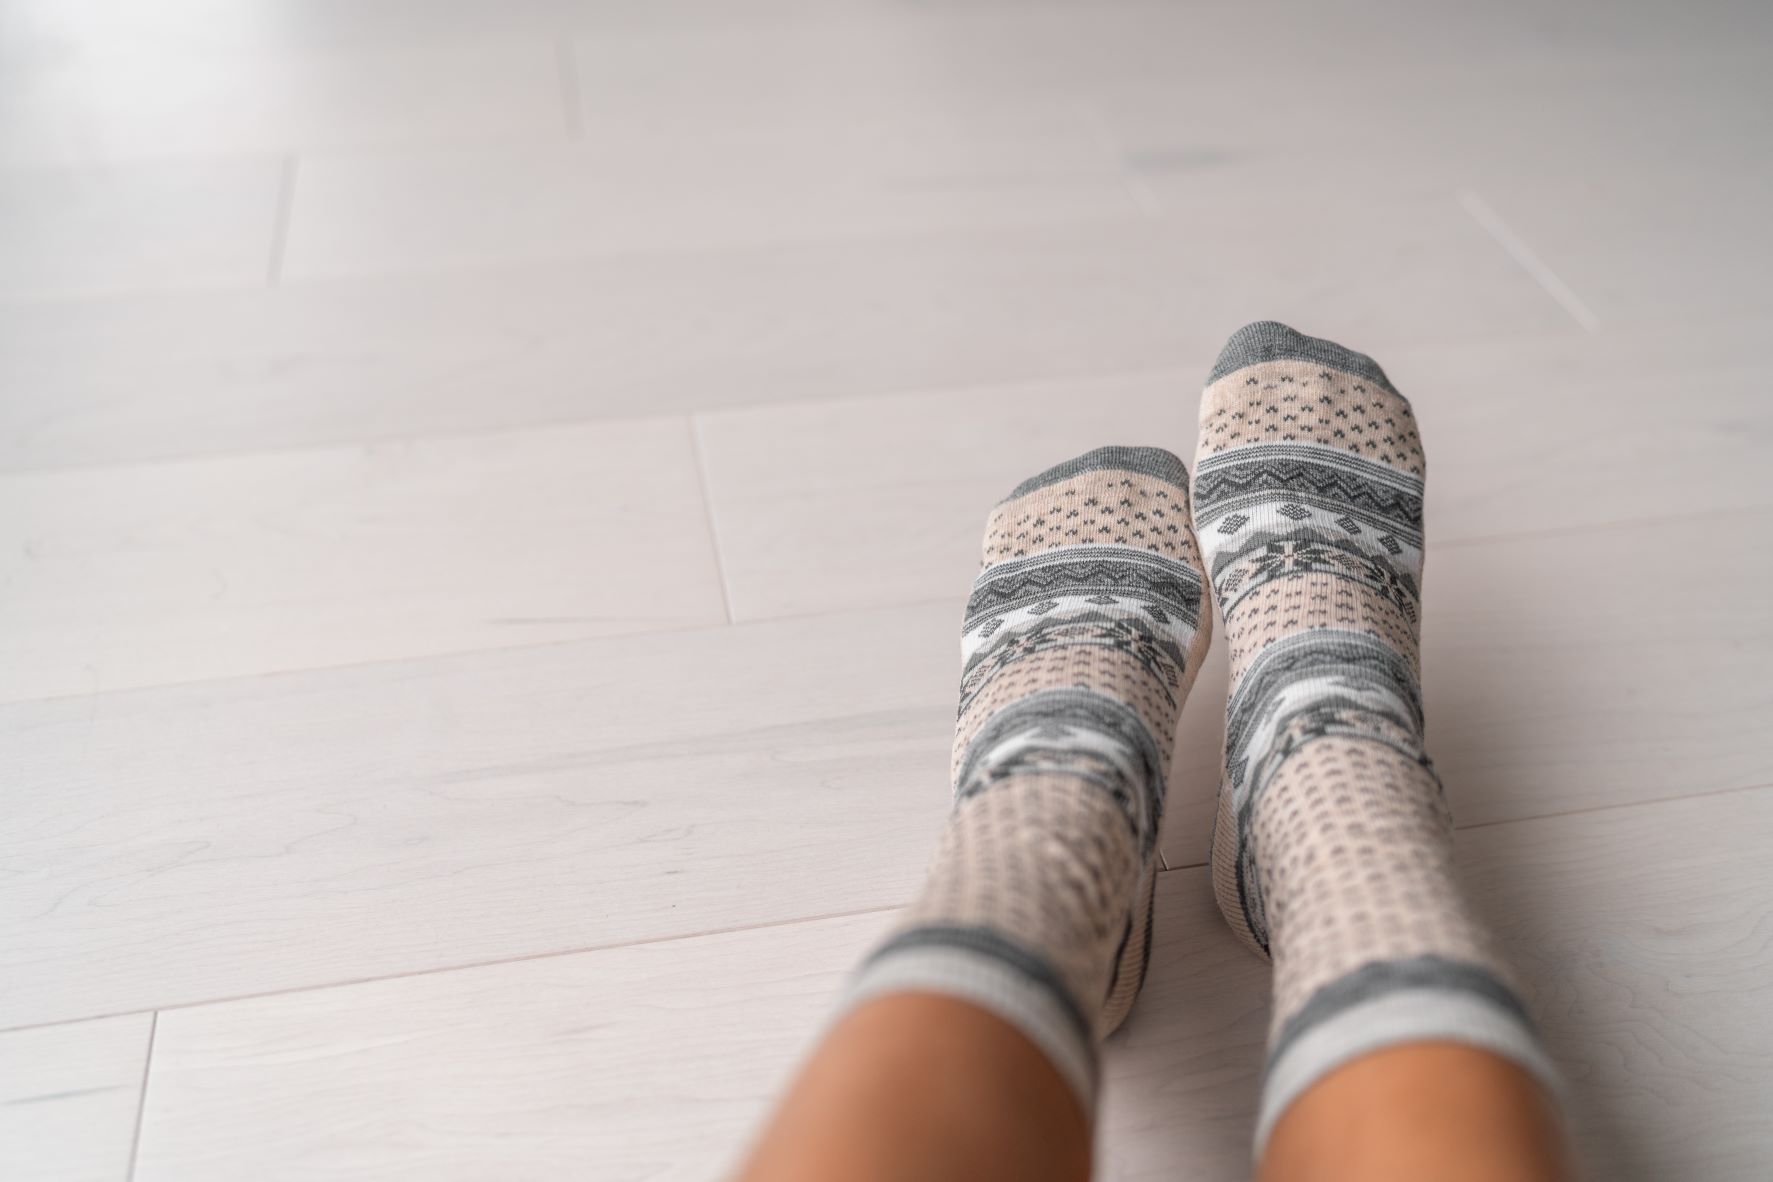 These cute compression socks stop feet swelling and soreness